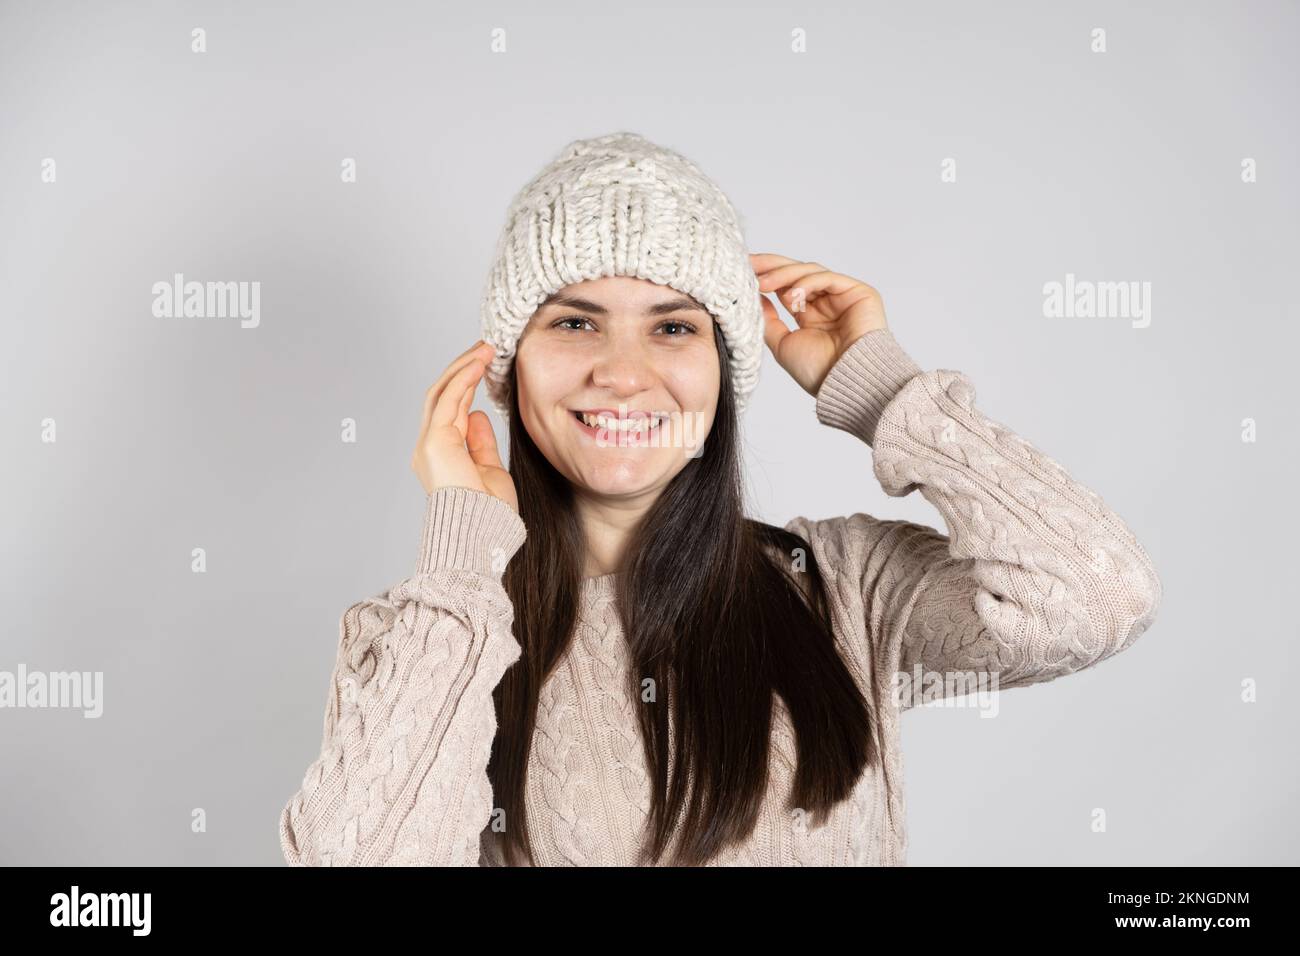 A happy brunette woman in a winter hat and a knitted sweater smiles on a white background. Stock Photo